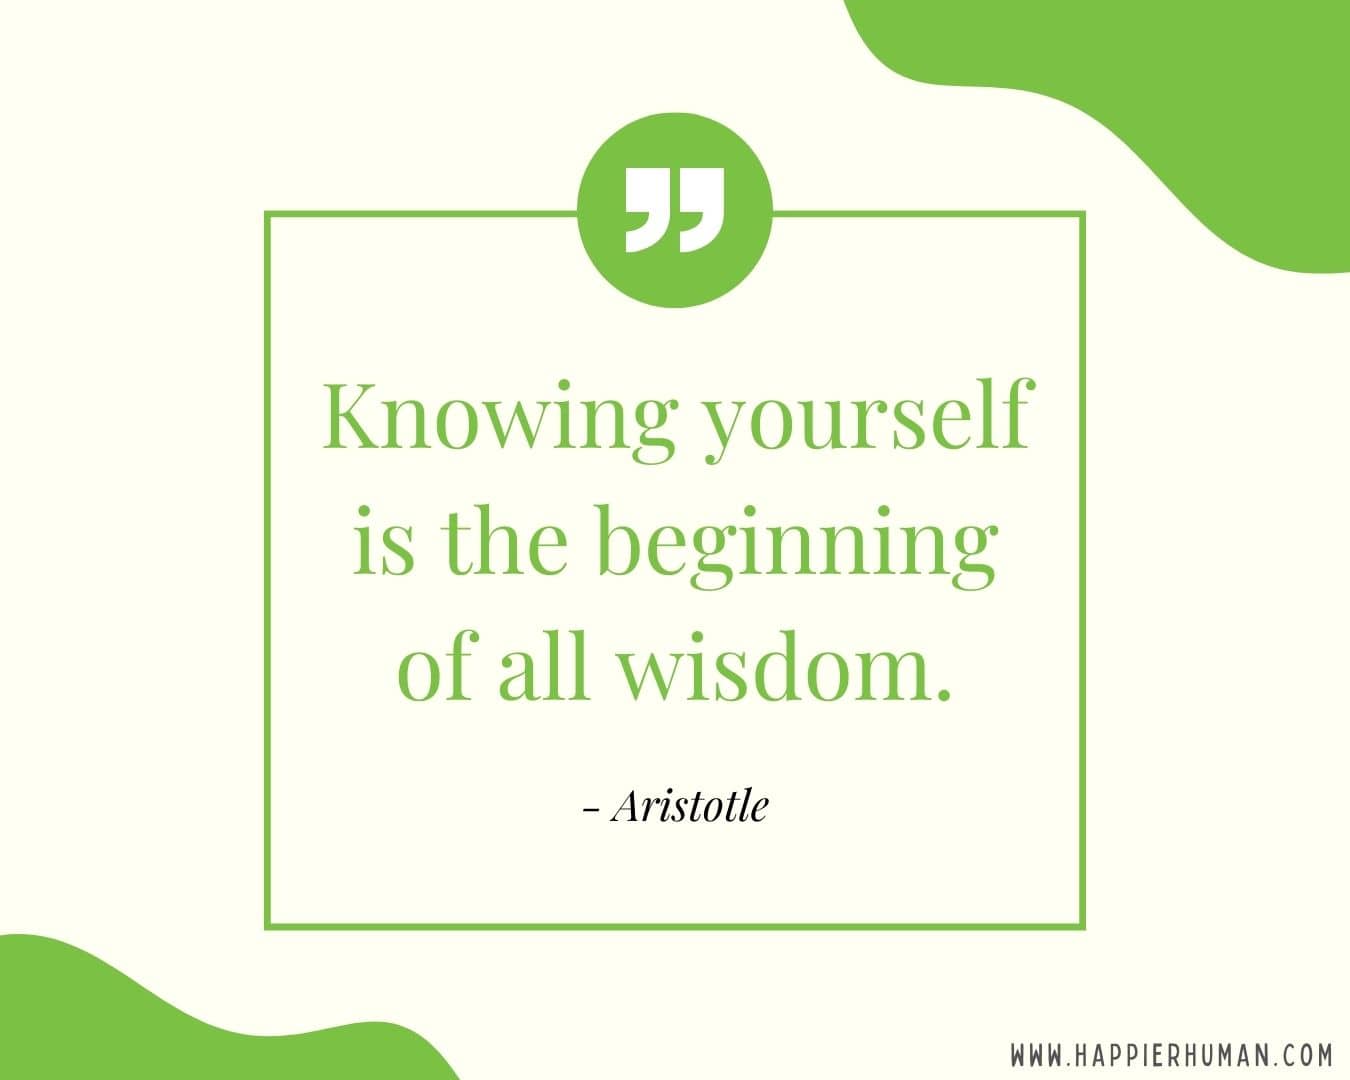 Introvert Quotes - “Knowing yourself is the beginning of all wisdom.” – Aristotle